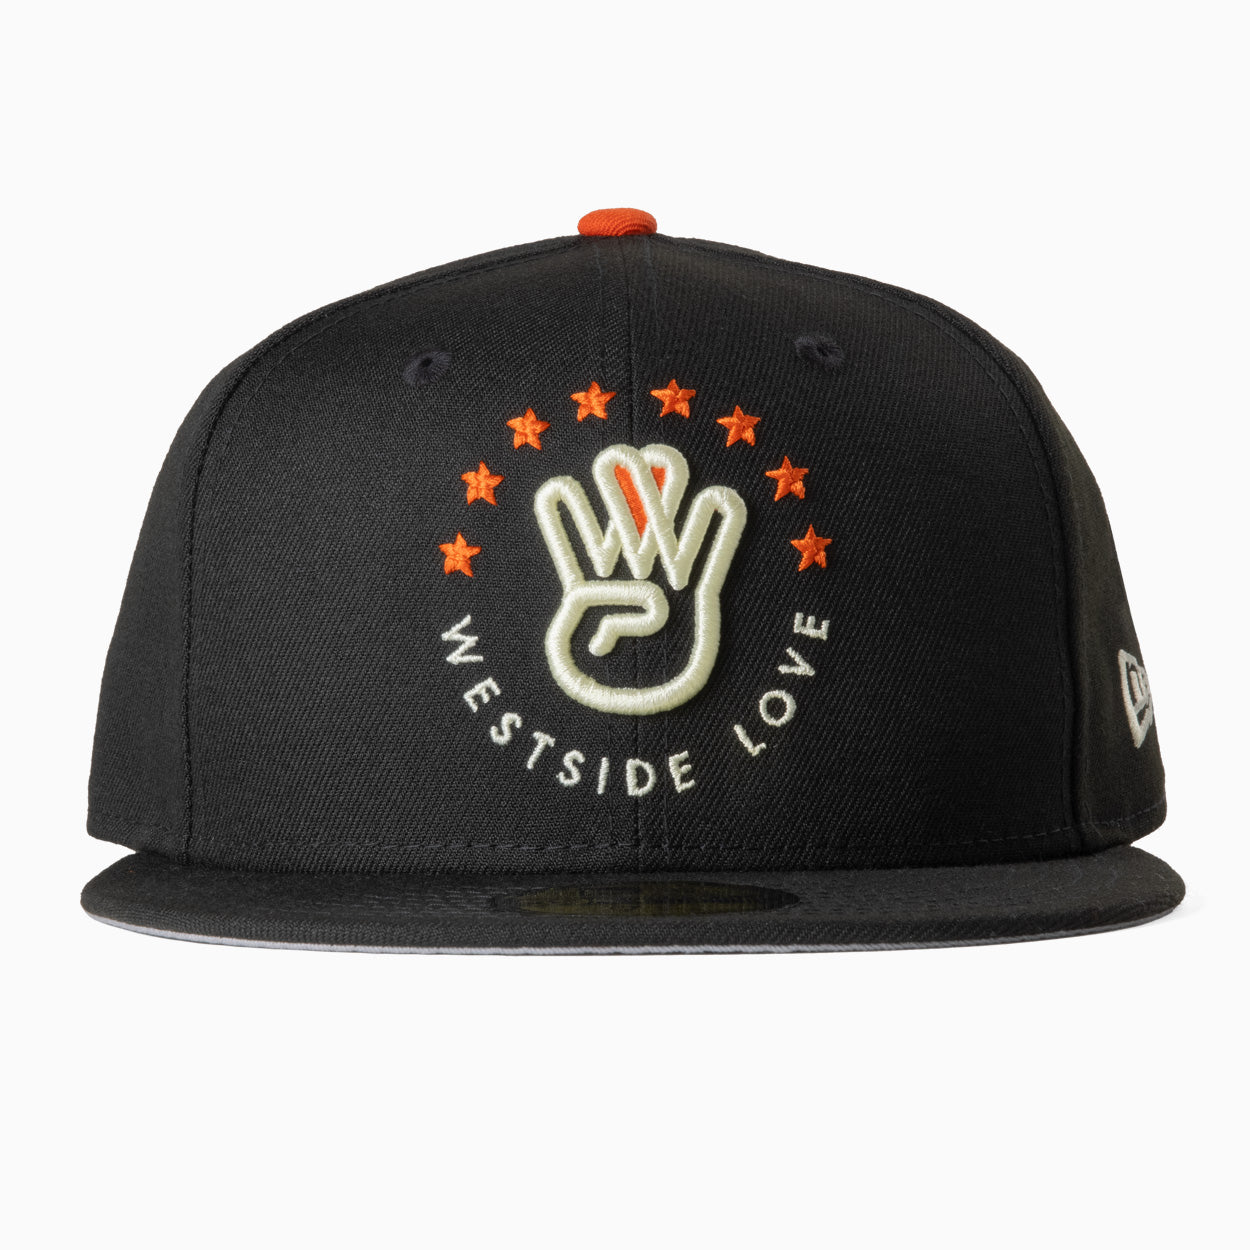 Union SF New Era Fitted